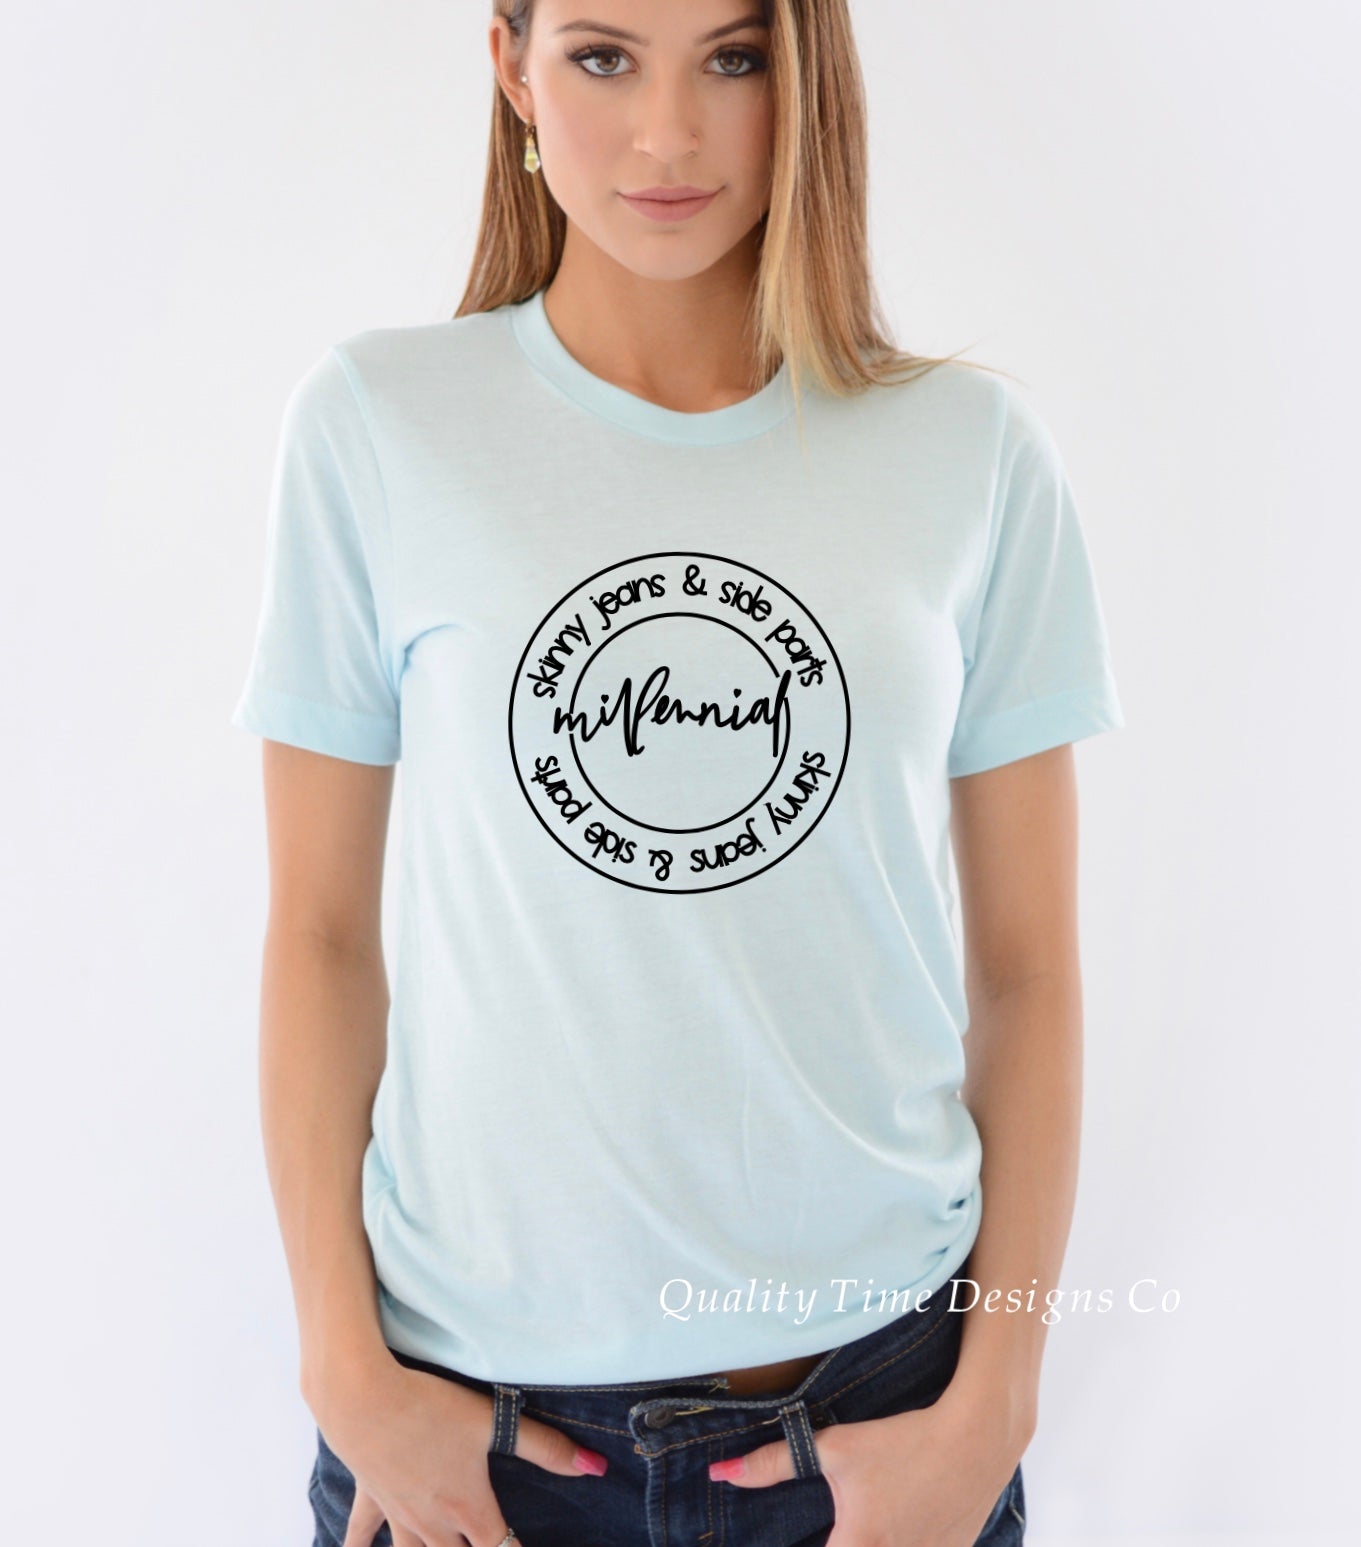 Millennial skinny Jeans and side parts t-shirt 